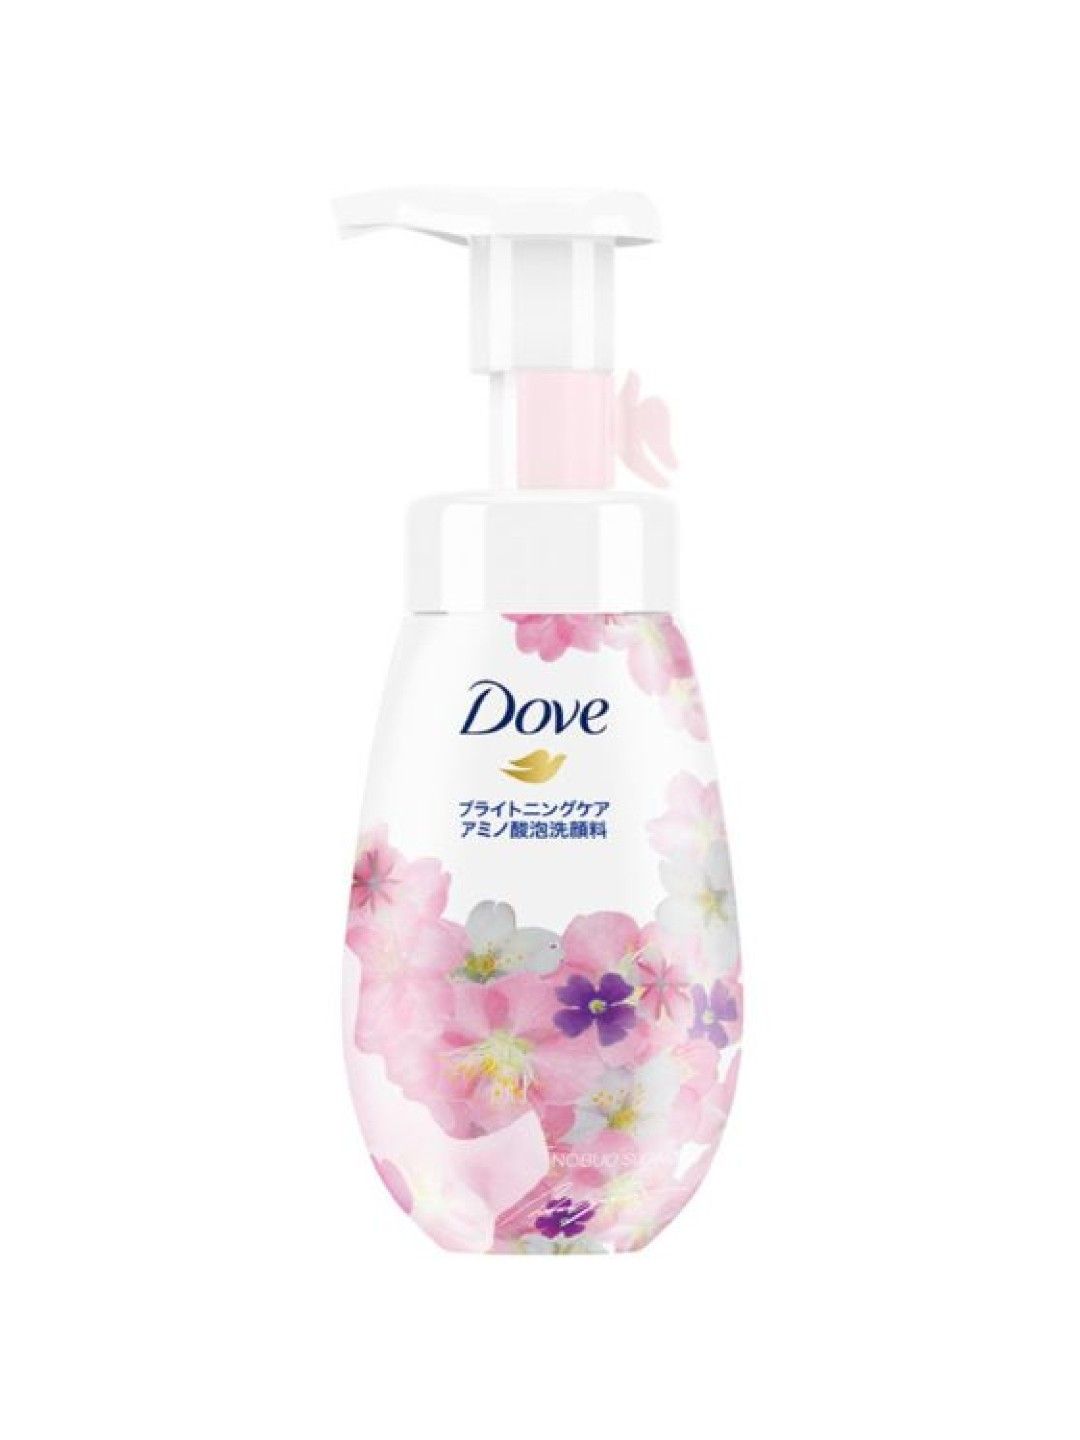 Dove Amino Acid Facial Cleansing Mousse (160ml)